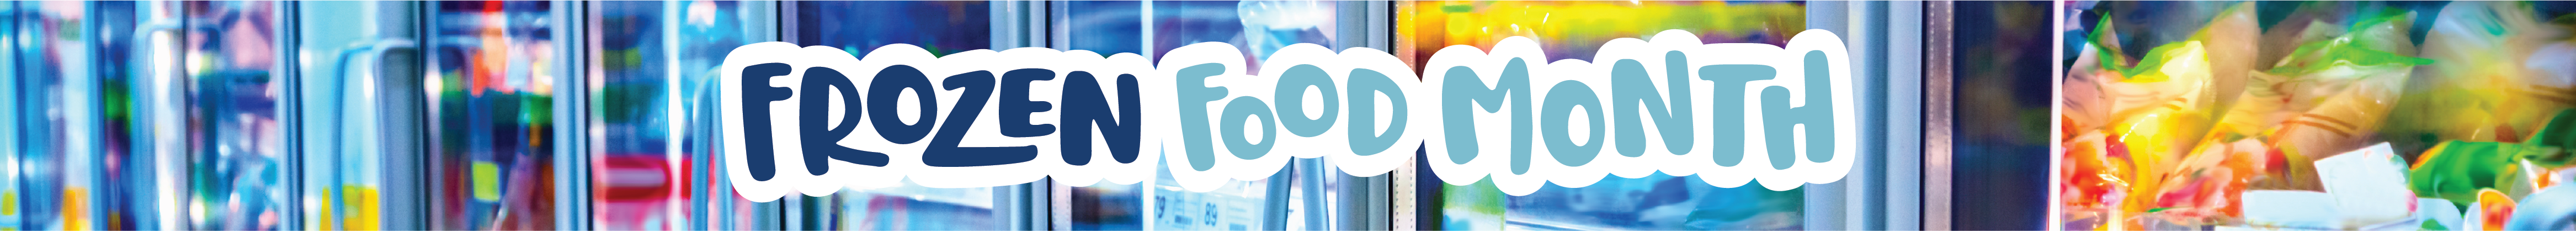 FROZEN FOOD MONTH BANNERS 2022 1